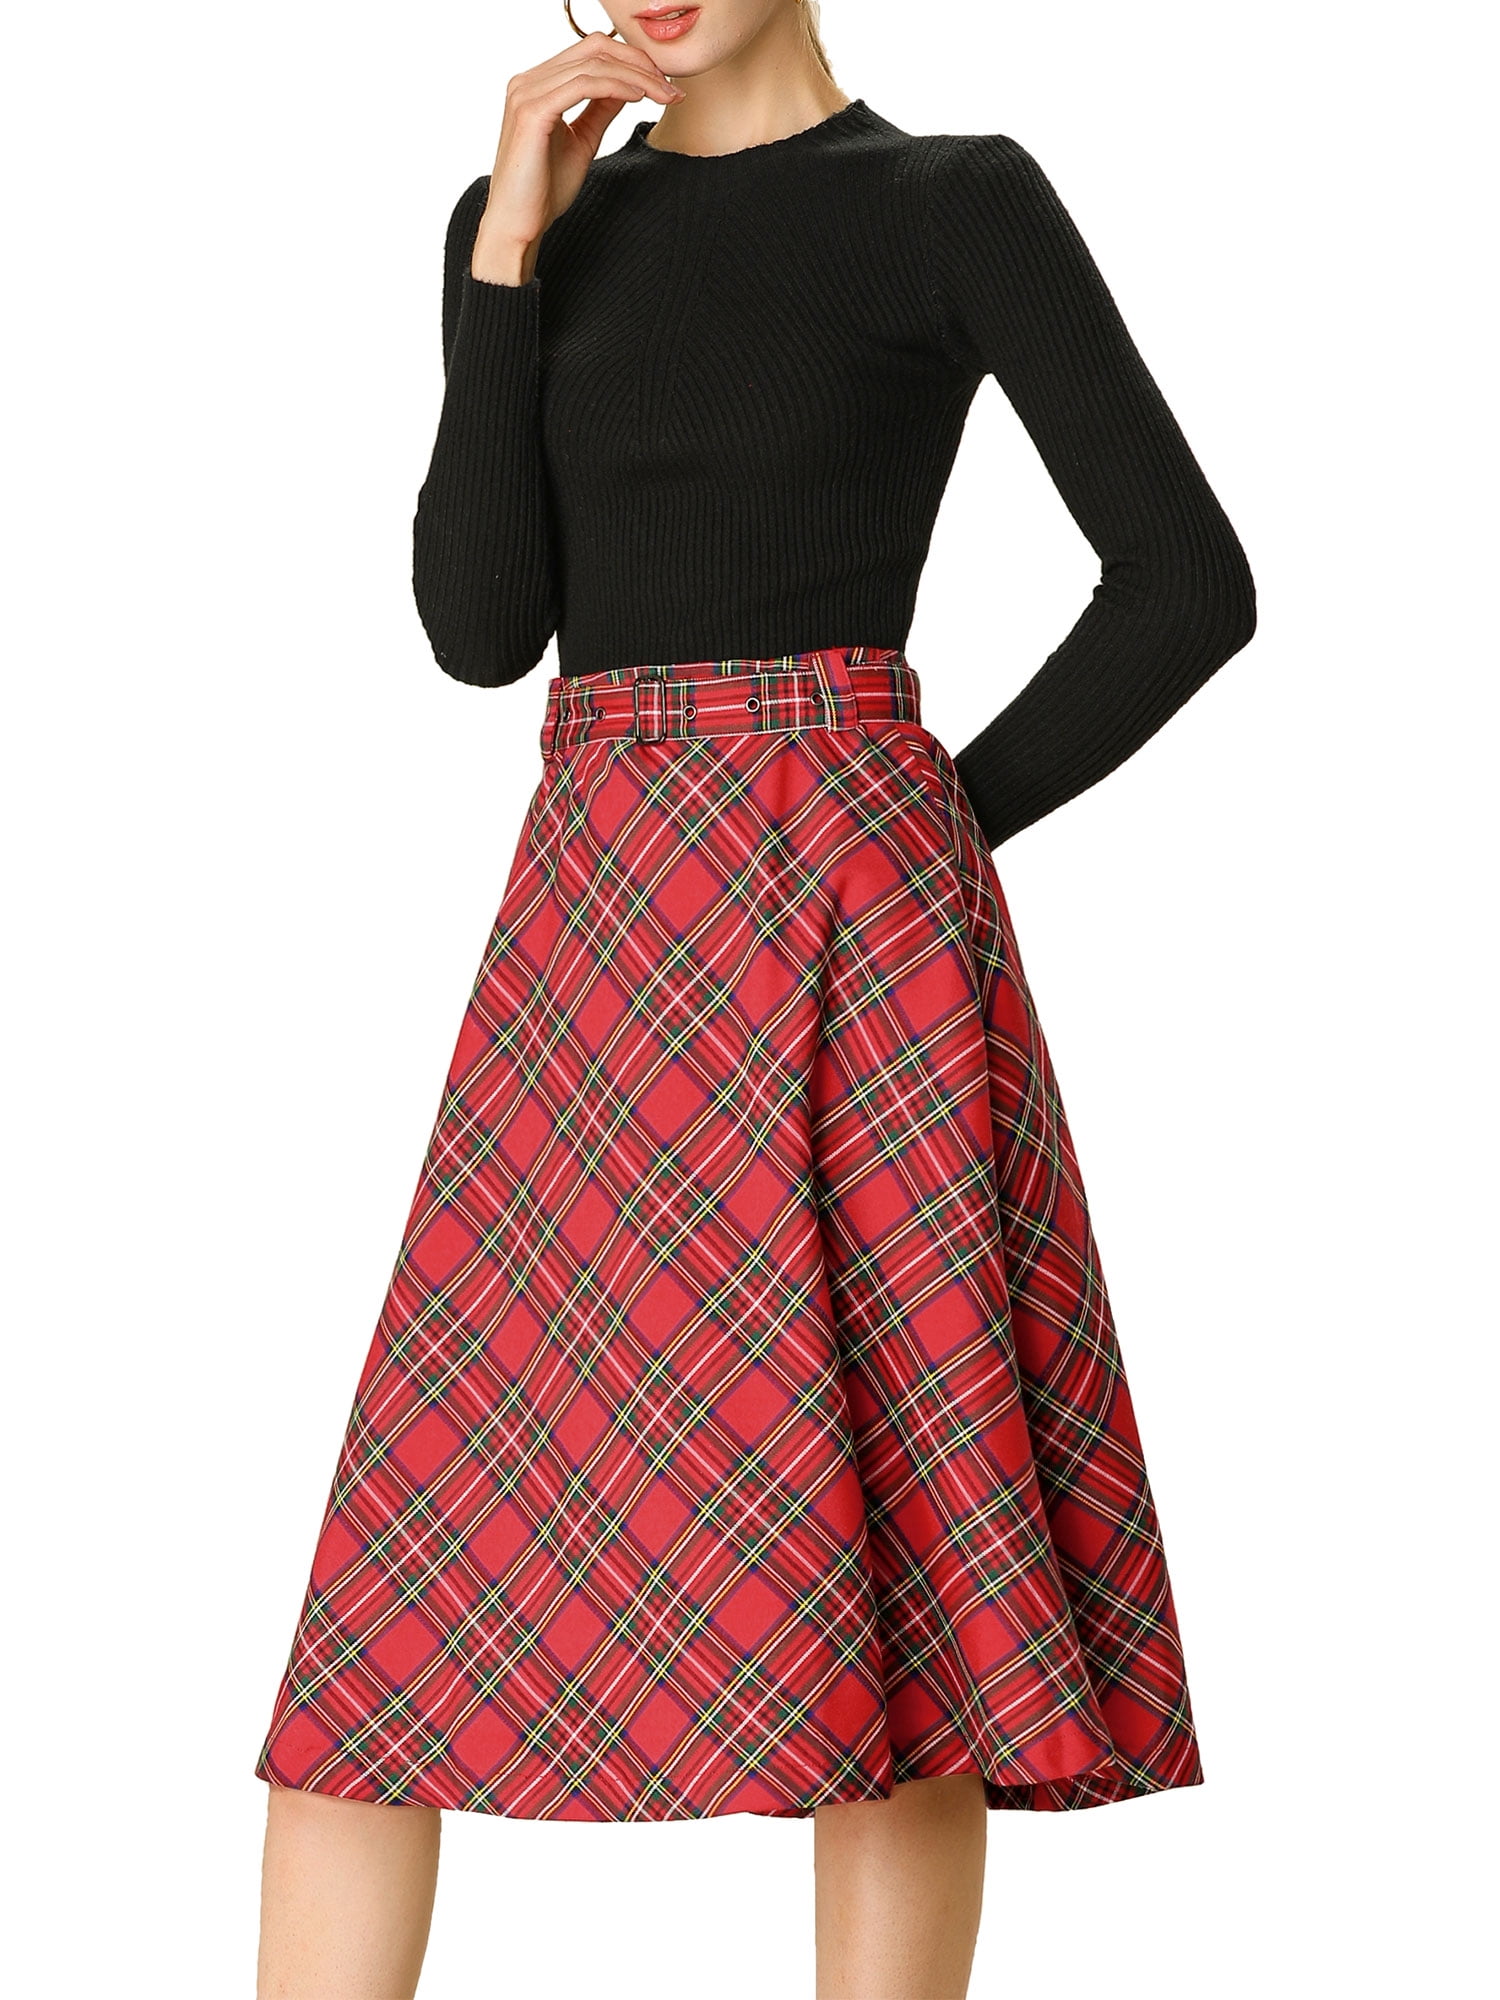 Bristol Navy Blue And Red Plaid Flannel Midi Skirt, 59% OFF